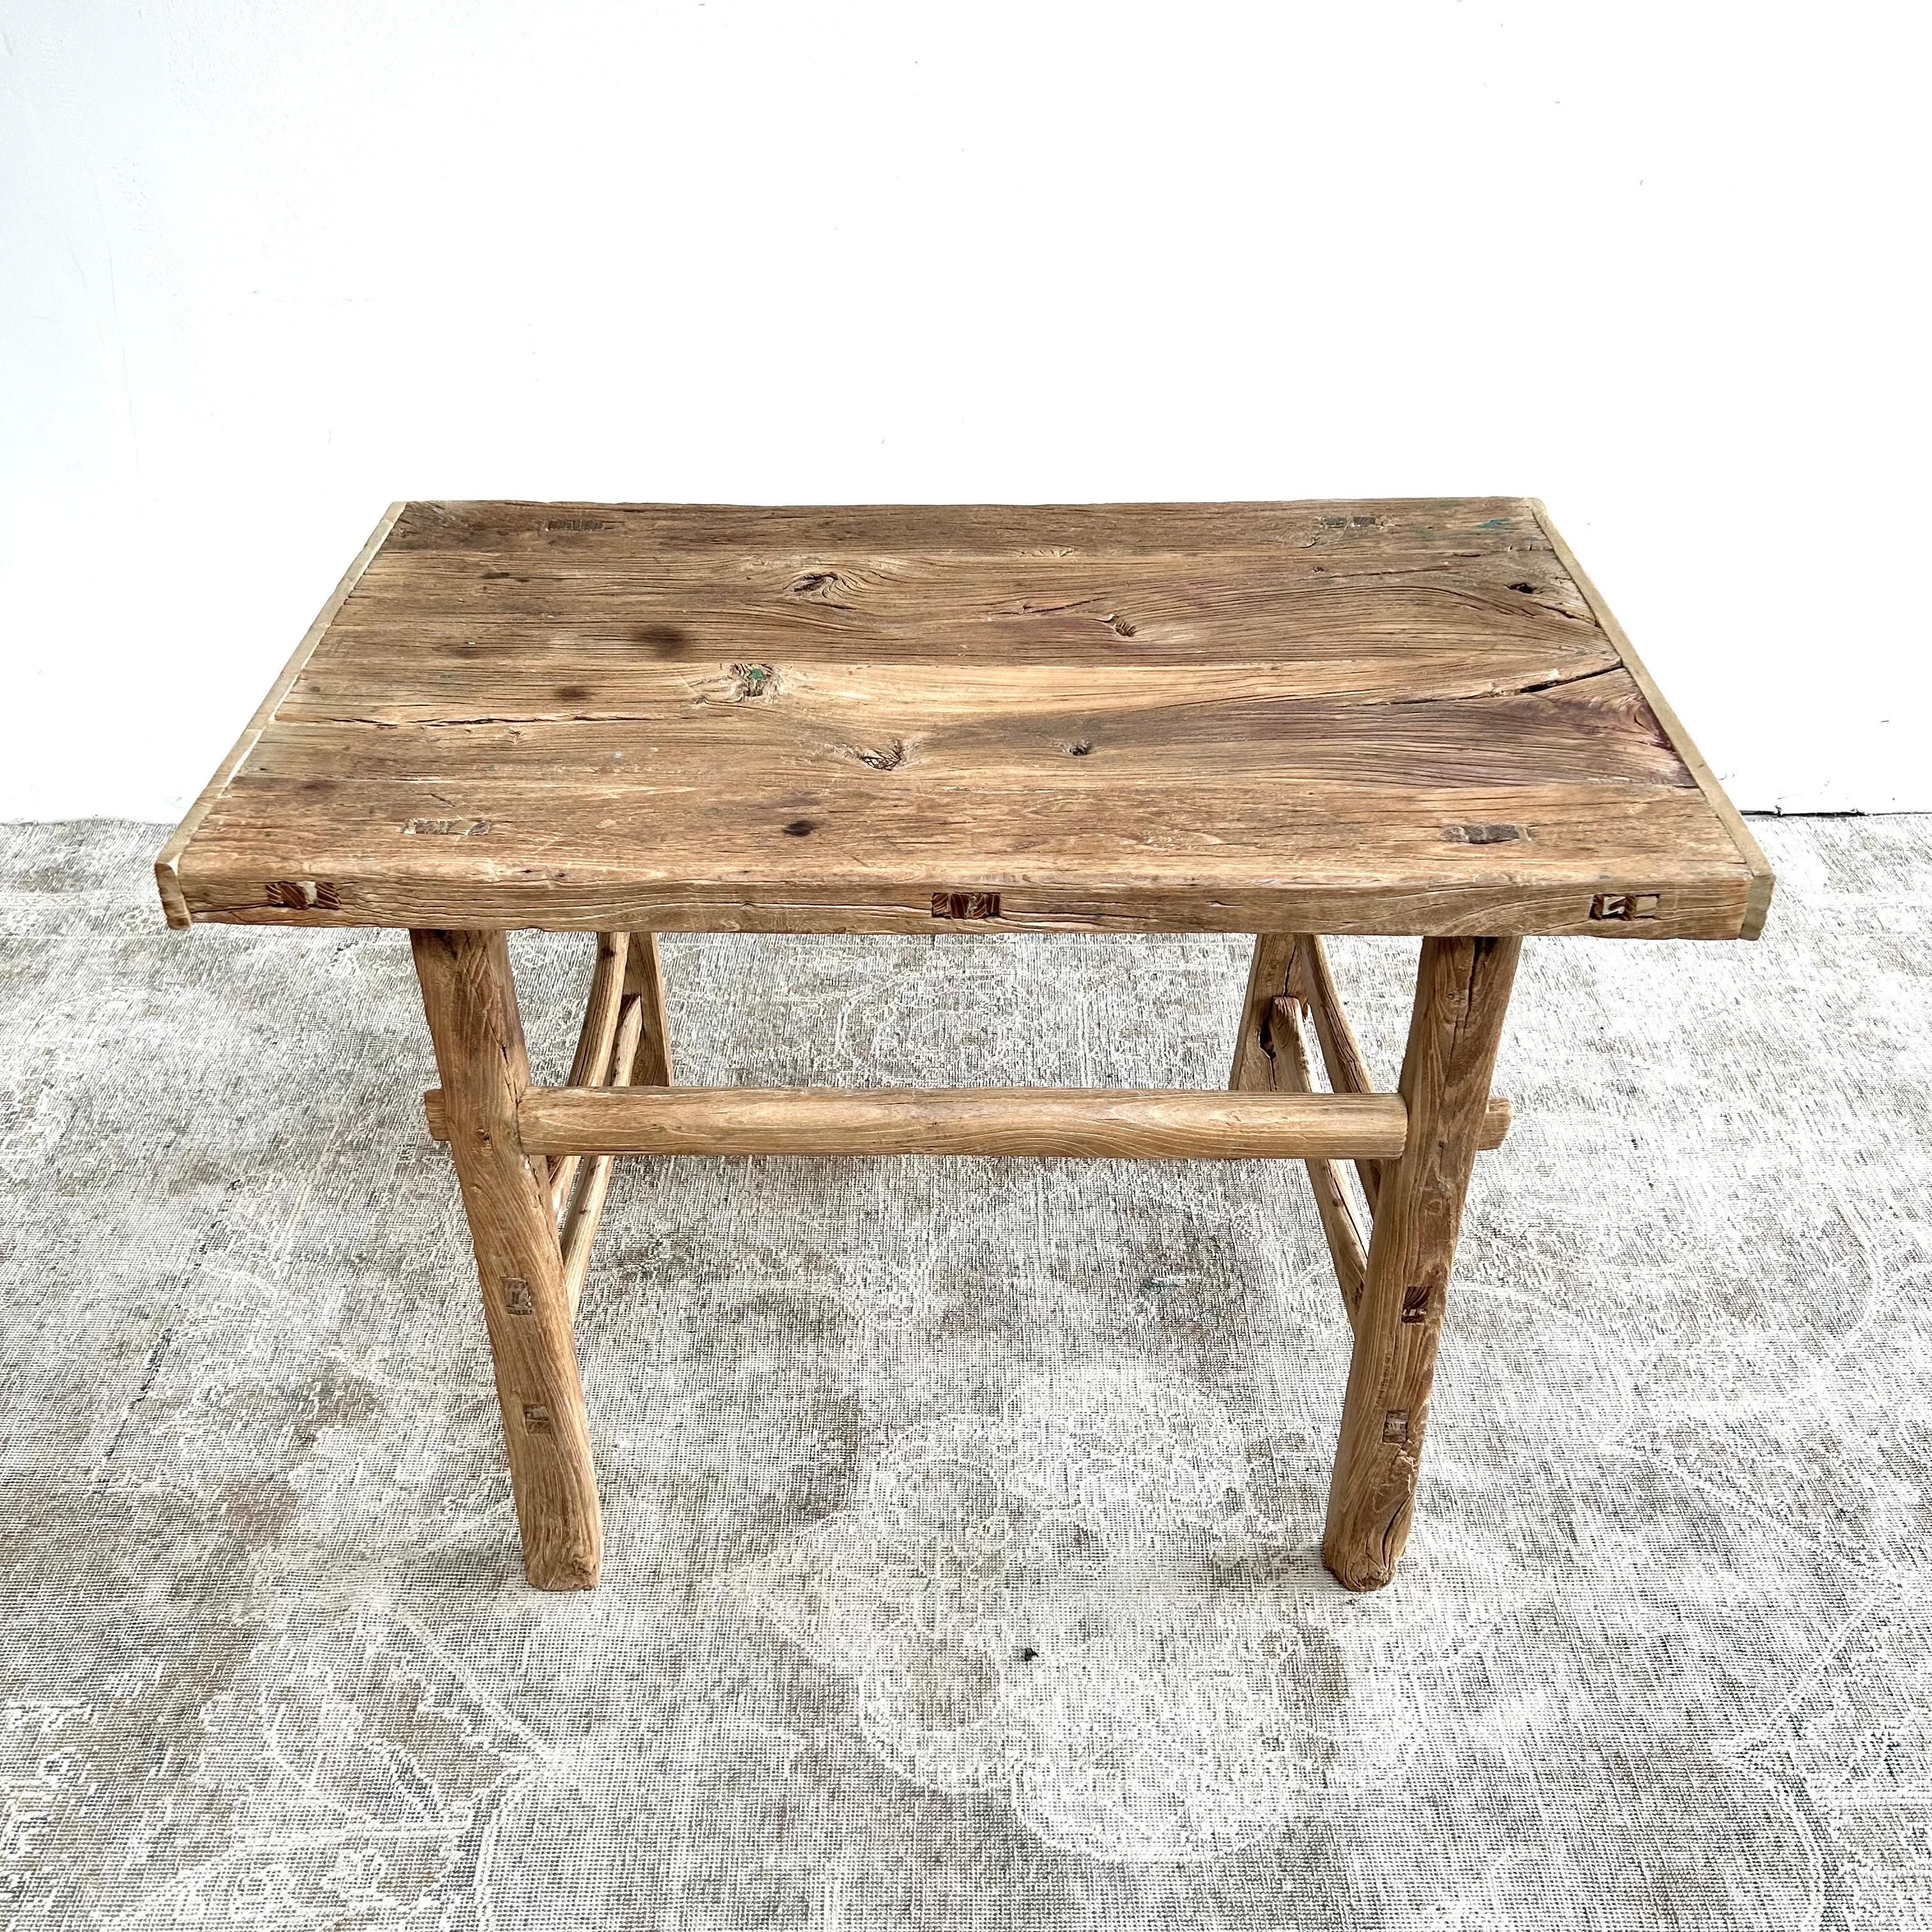 Elm console 41”w x 25”d x 30”h
Vintage antique elm wood console table Made from Vintage reclaimed elm wood. Beautiful antique patina, with weathering and age, these are solid and sturdy ready for daily use, use as an entry table, sofa table or